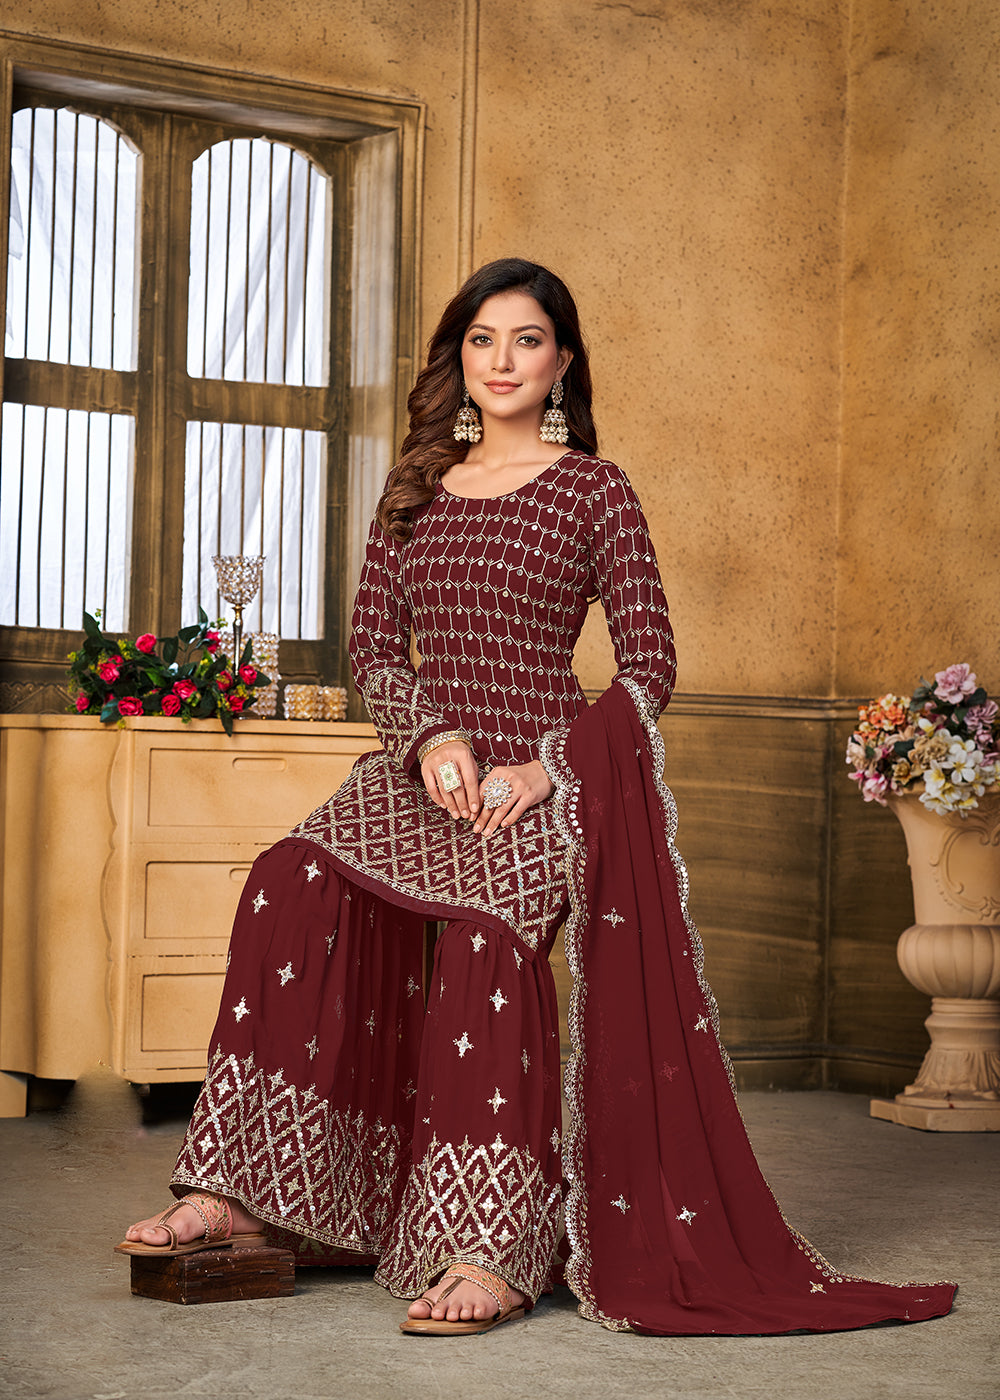 Shop Now Pretty Sequins Embroidered Maroon Festive Gharara Style Suit Online at Empress Clothing in USA, UK, Canada, Italy & Worldwide.